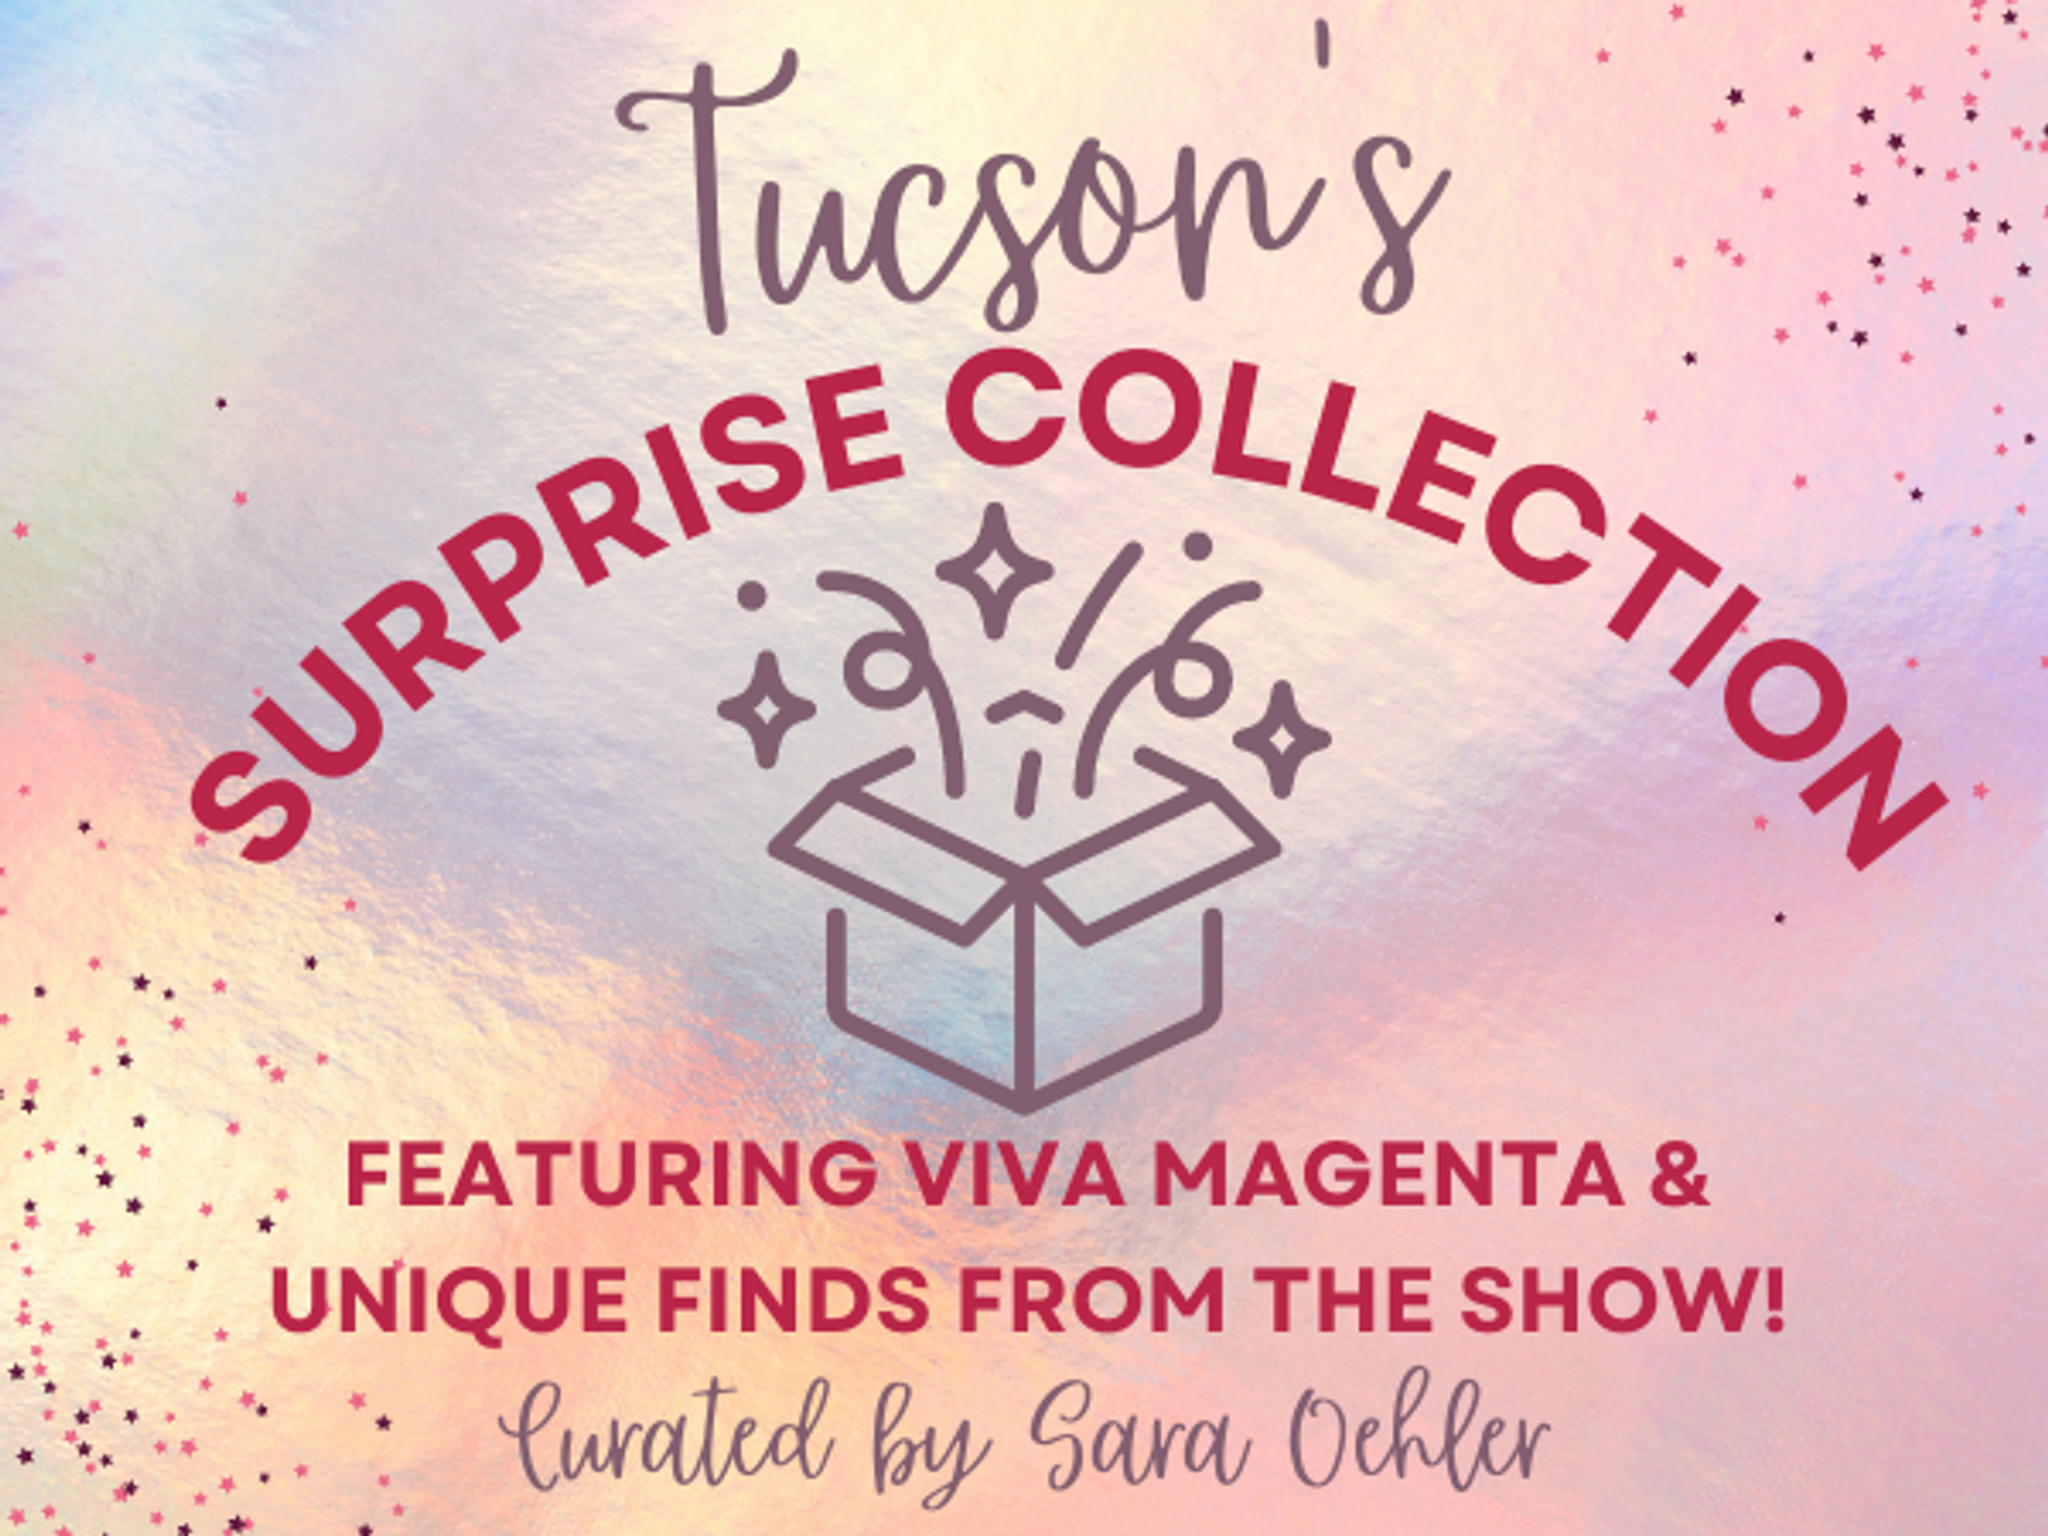 Tucson’s Surprise Collection Featuring Viva Magenta & Unique Finds From The Show - Curated by Sara Oehler